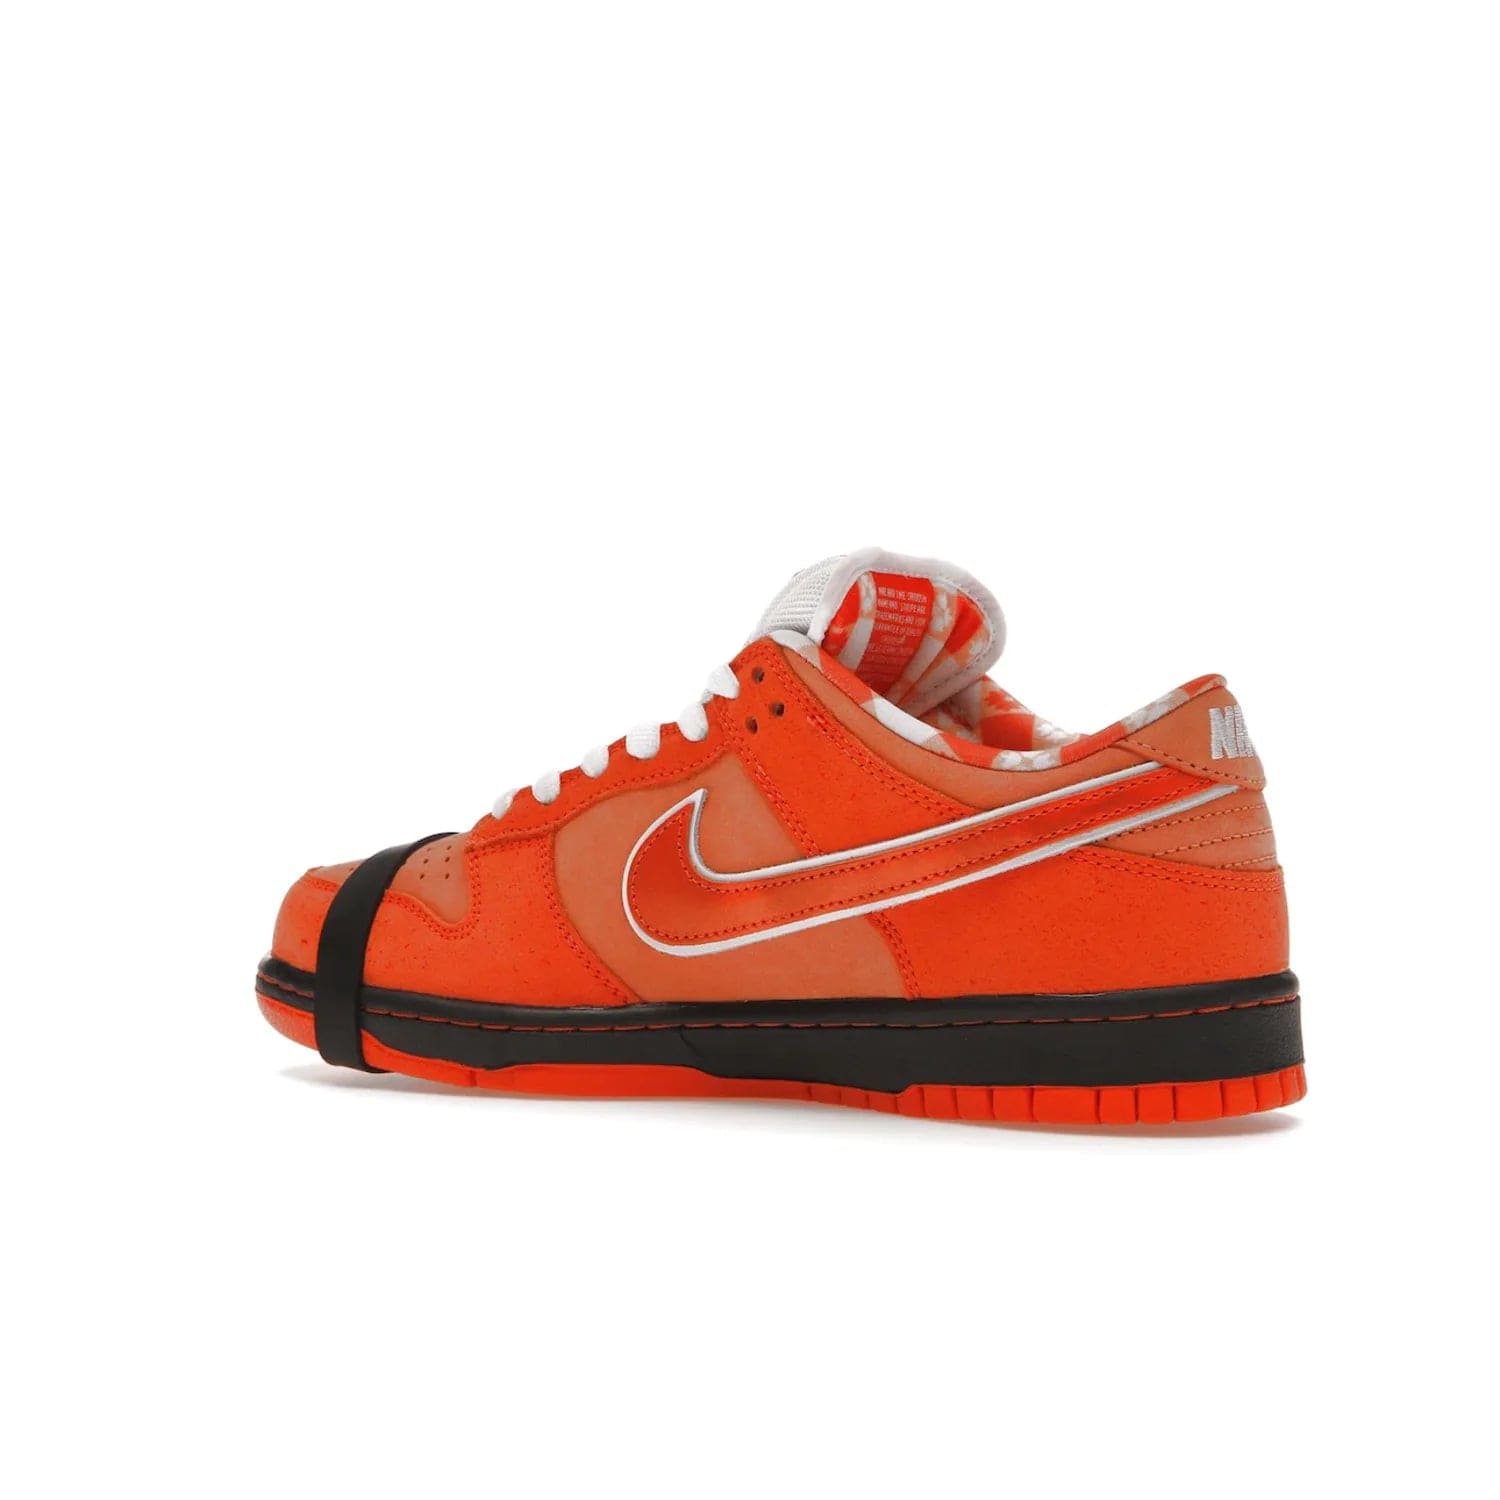 Nike SB Dunk Low Concepts Orange Lobster - Image 22 - Only at www.BallersClubKickz.com - Limited Nike SB Dunk Low Concepts Orange Lobster features premium nubuck upper with vibrant oranges for eye-catching colorblocked design. Signature Nike SB tag and bib-inspired interior for added texture. Outsole and cupsole provide extra reinforcement. Get it 12/20/2022.